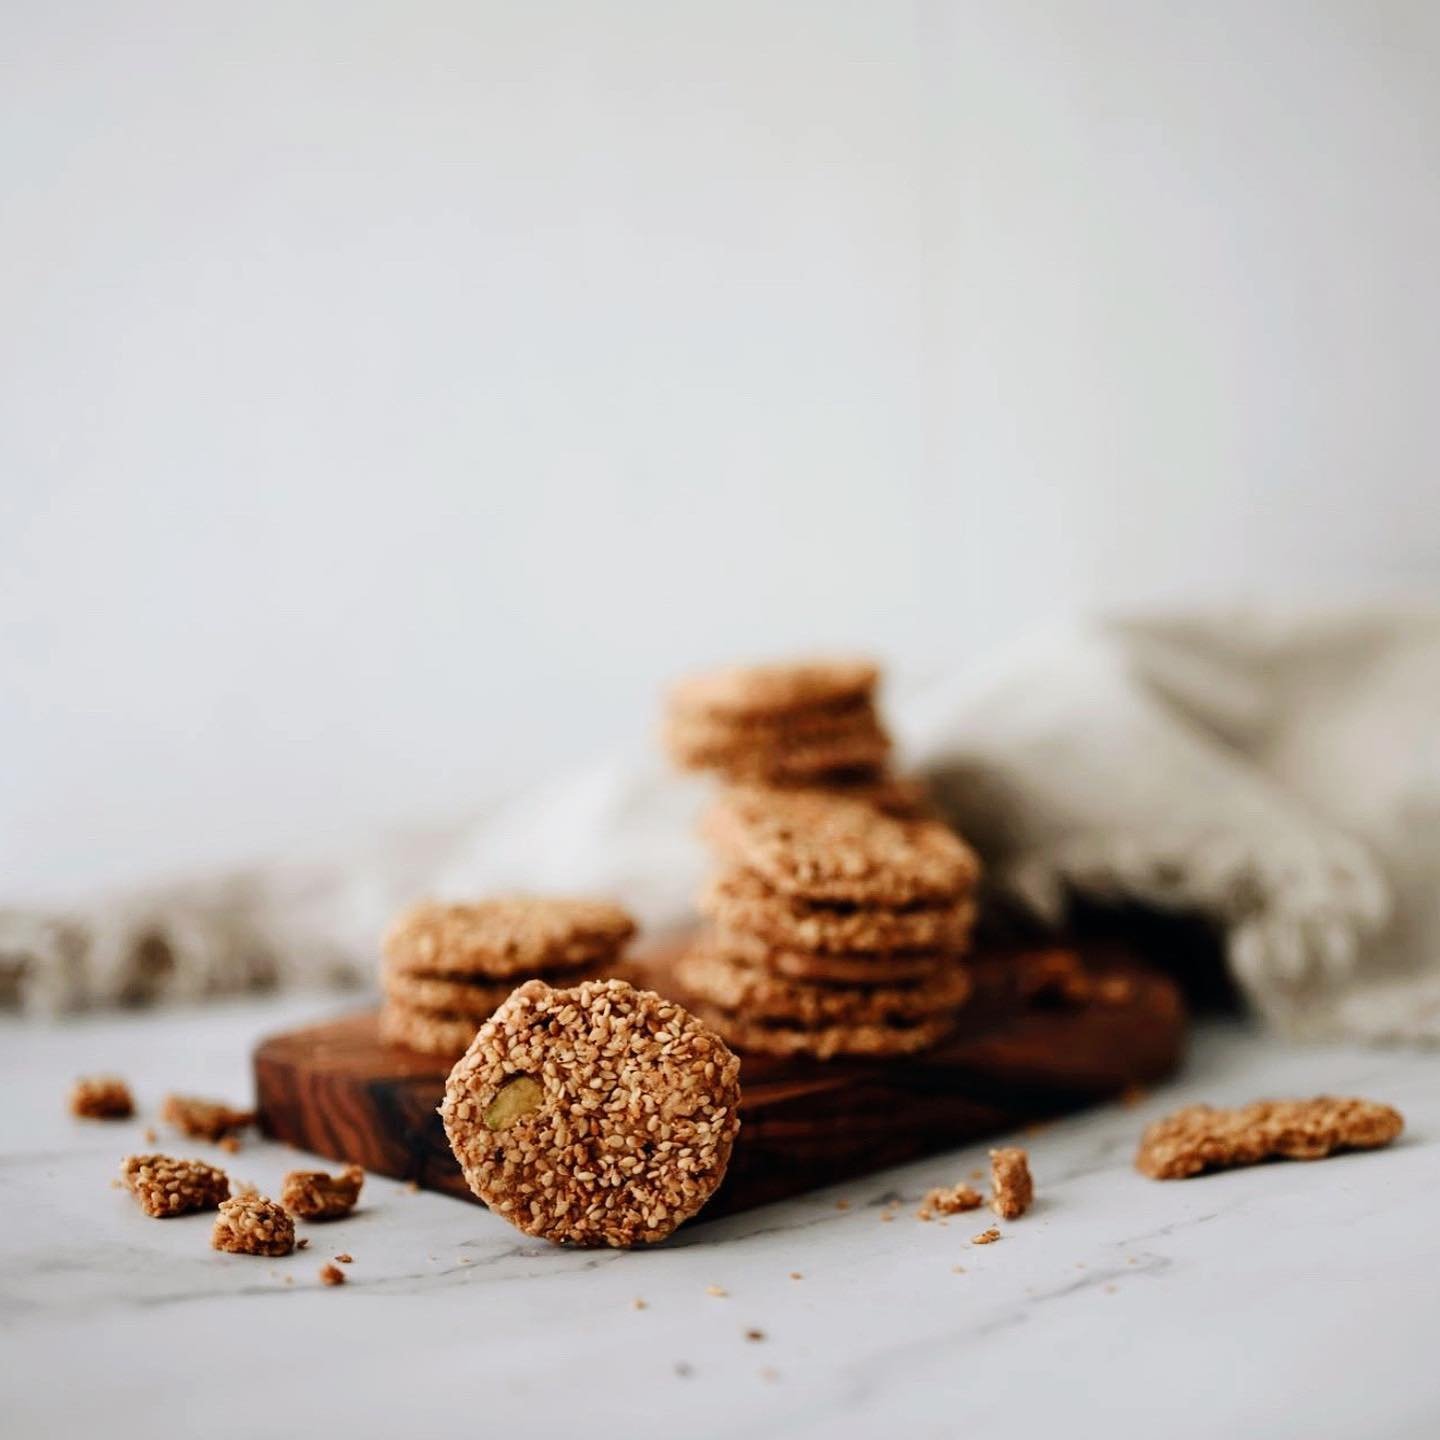 Our ANZAC Biscuits 🍯

Chewy and delicious! These biscuits originated during the war when they were sent by wives and women&rsquo;s groups to the soldiers abroad. They were chosen as their ingredients don&rsquo;t spoil easily, so the biscuits kept we